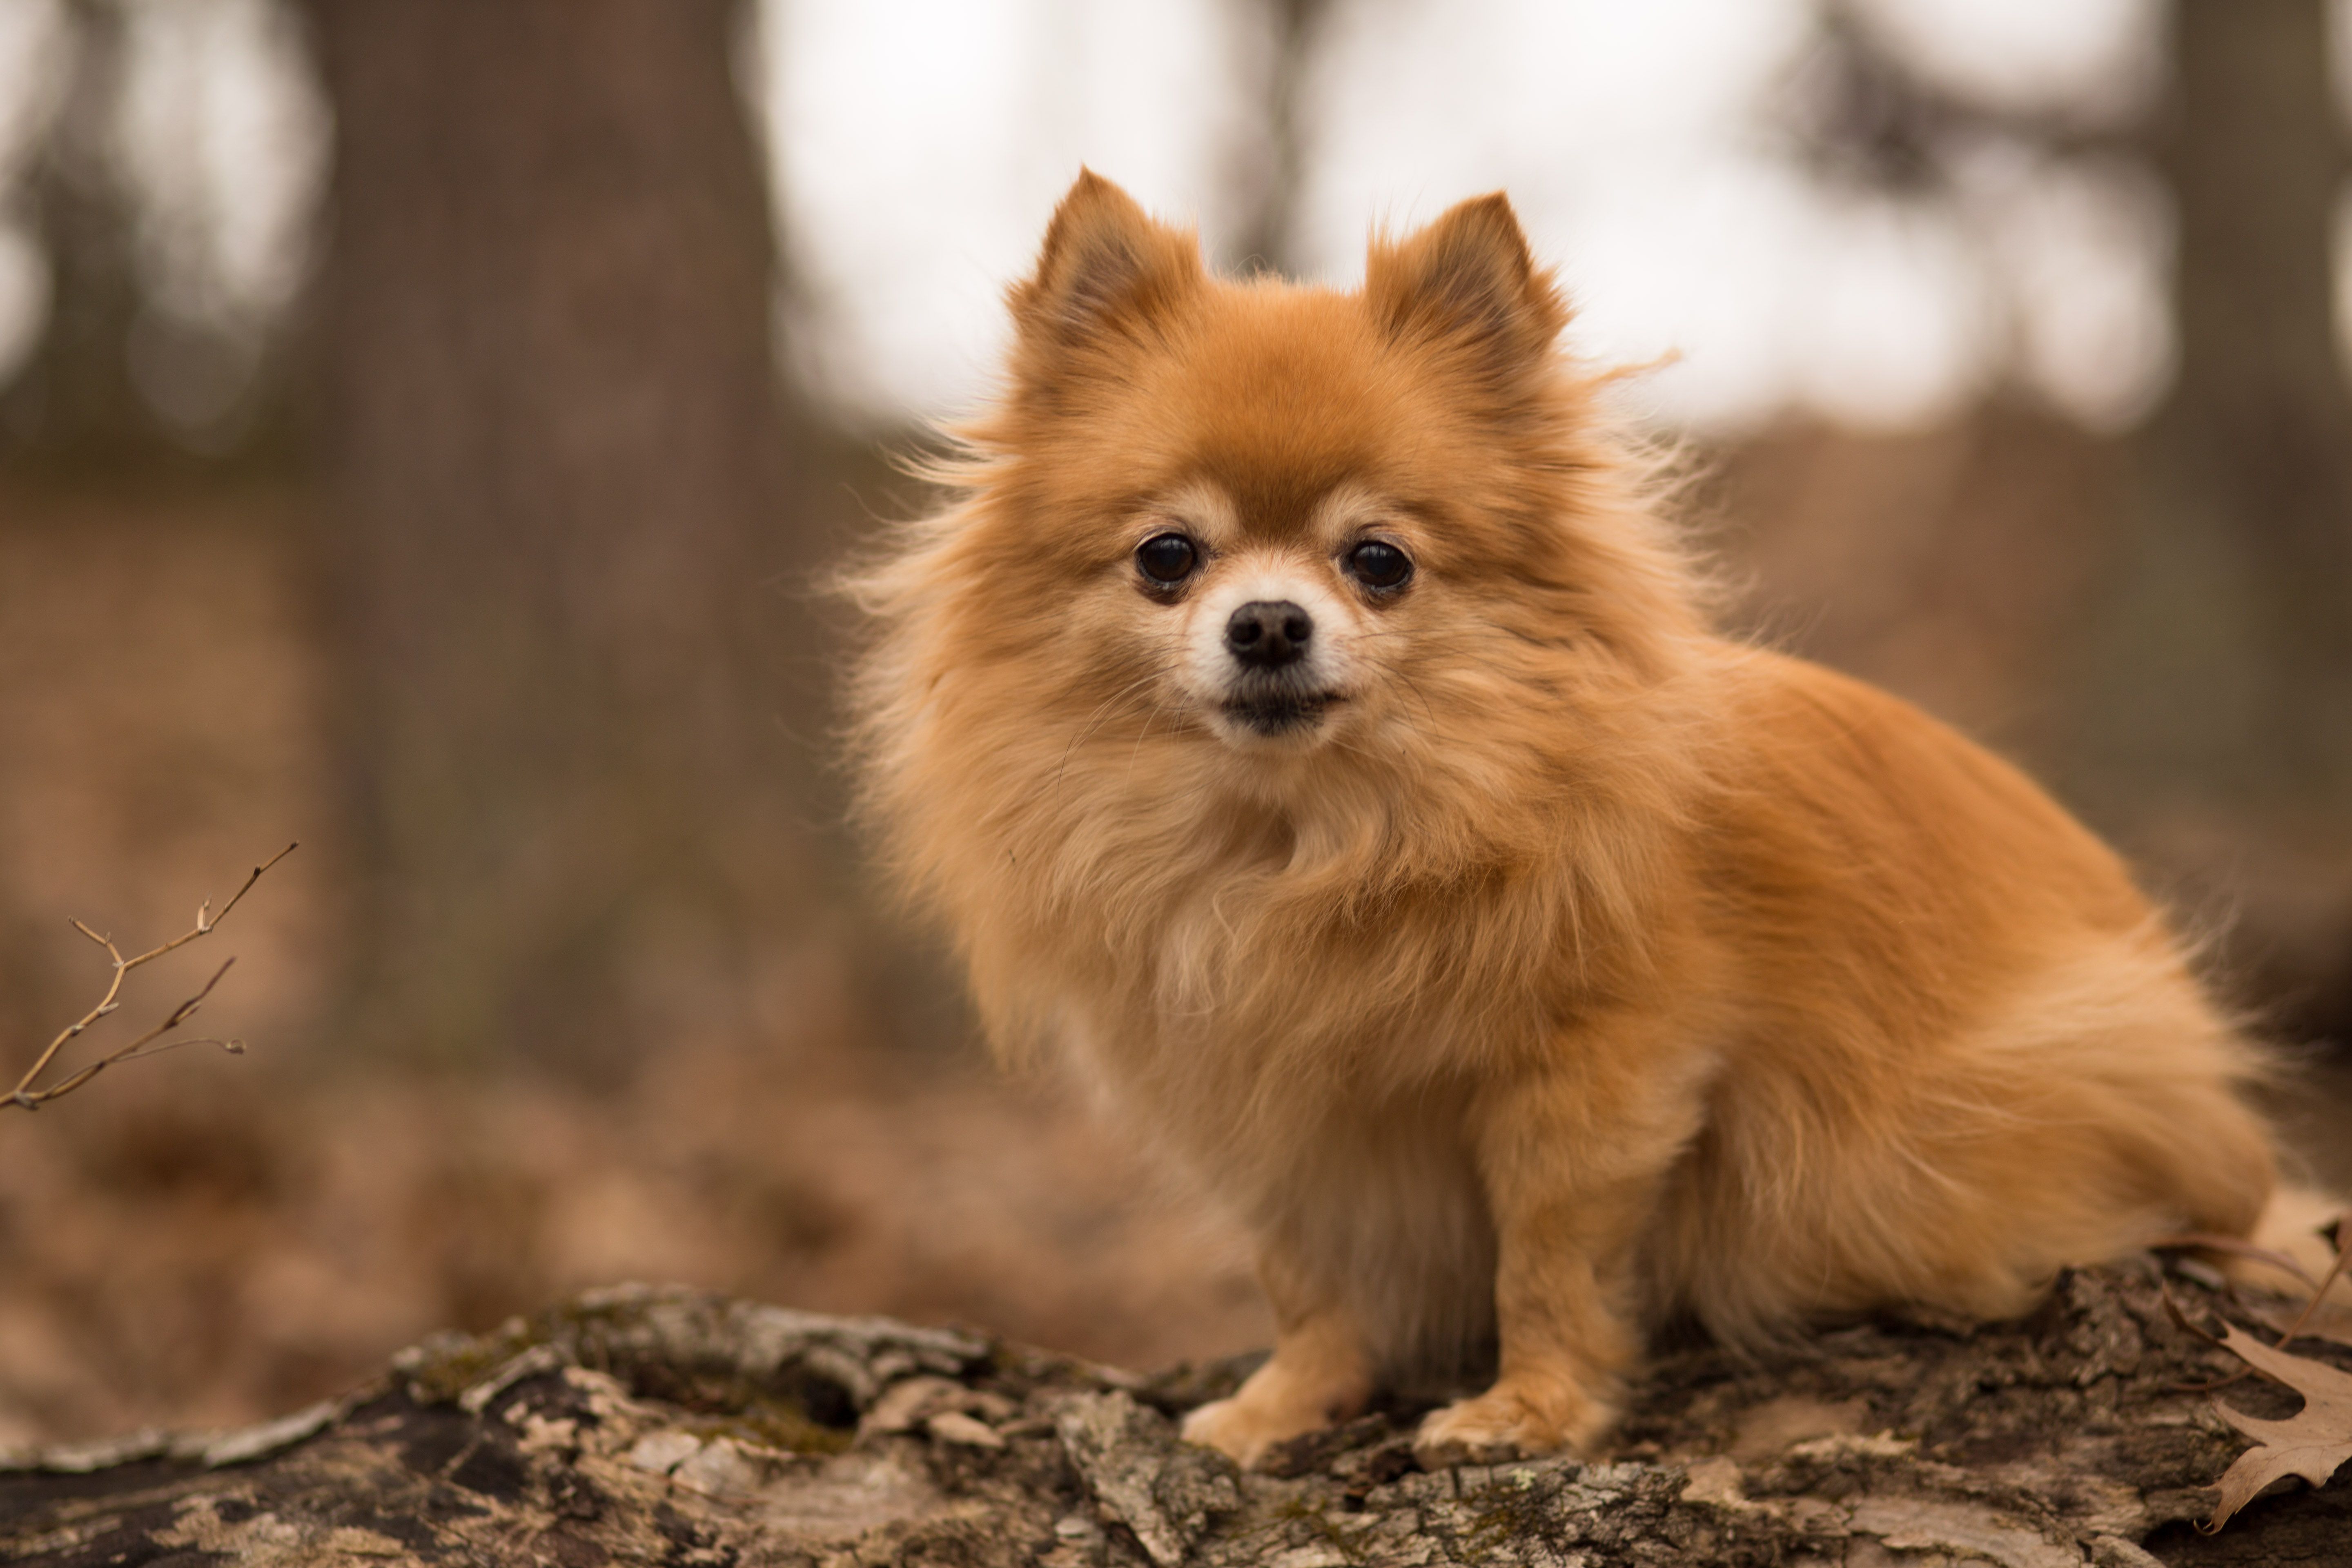 15 Best Teddy Bear Dog That Are Too Cute for Words